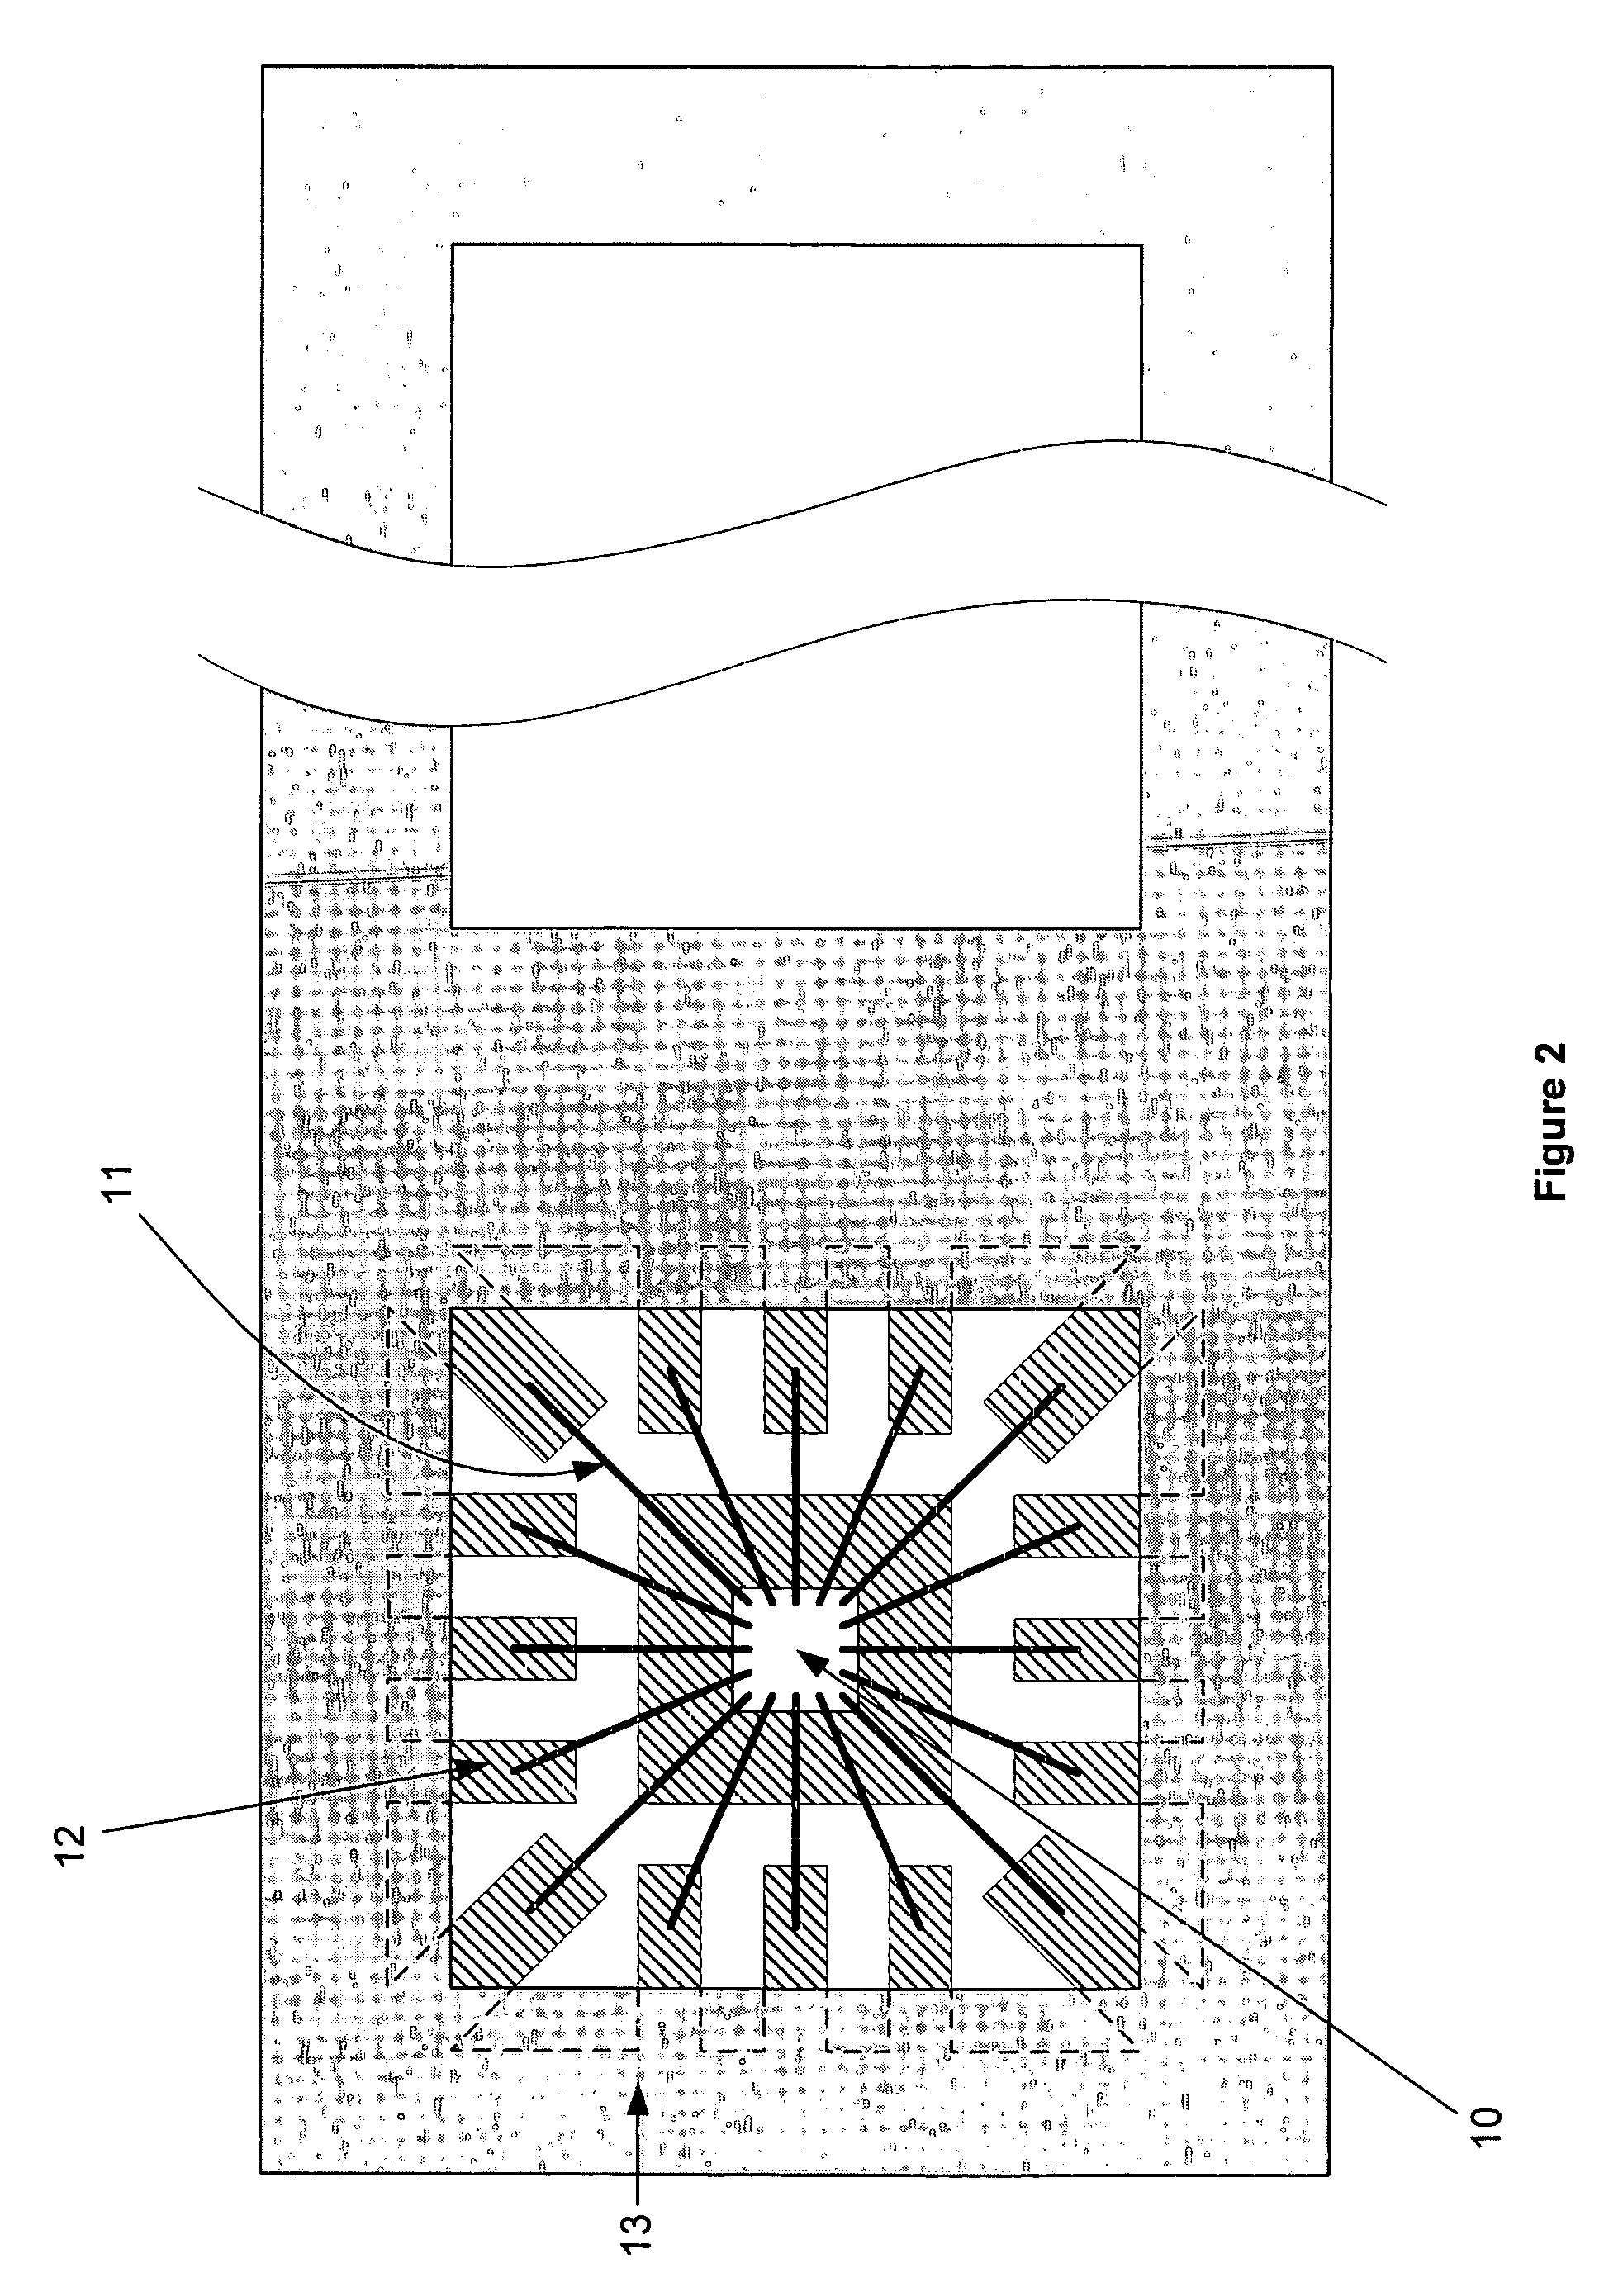 Insulation and reinforcement of individual bonding wires in integrated circuit packages